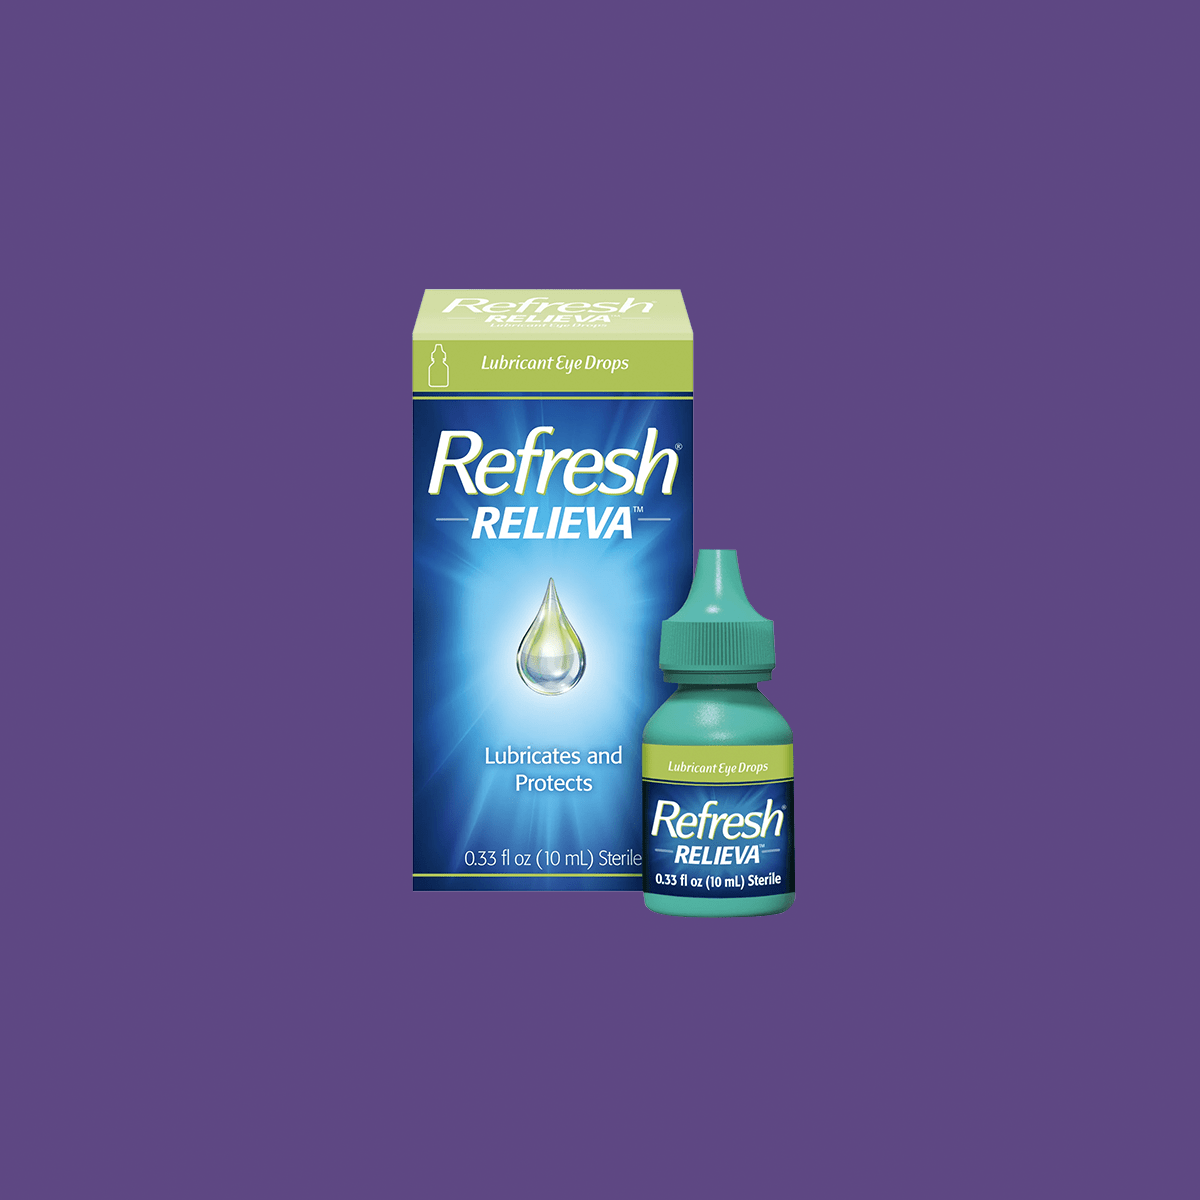 Refresh Relieva Eye Drops to relieve discomfort due to dry, irritated eyes (10mL) - Dryeye Rescue